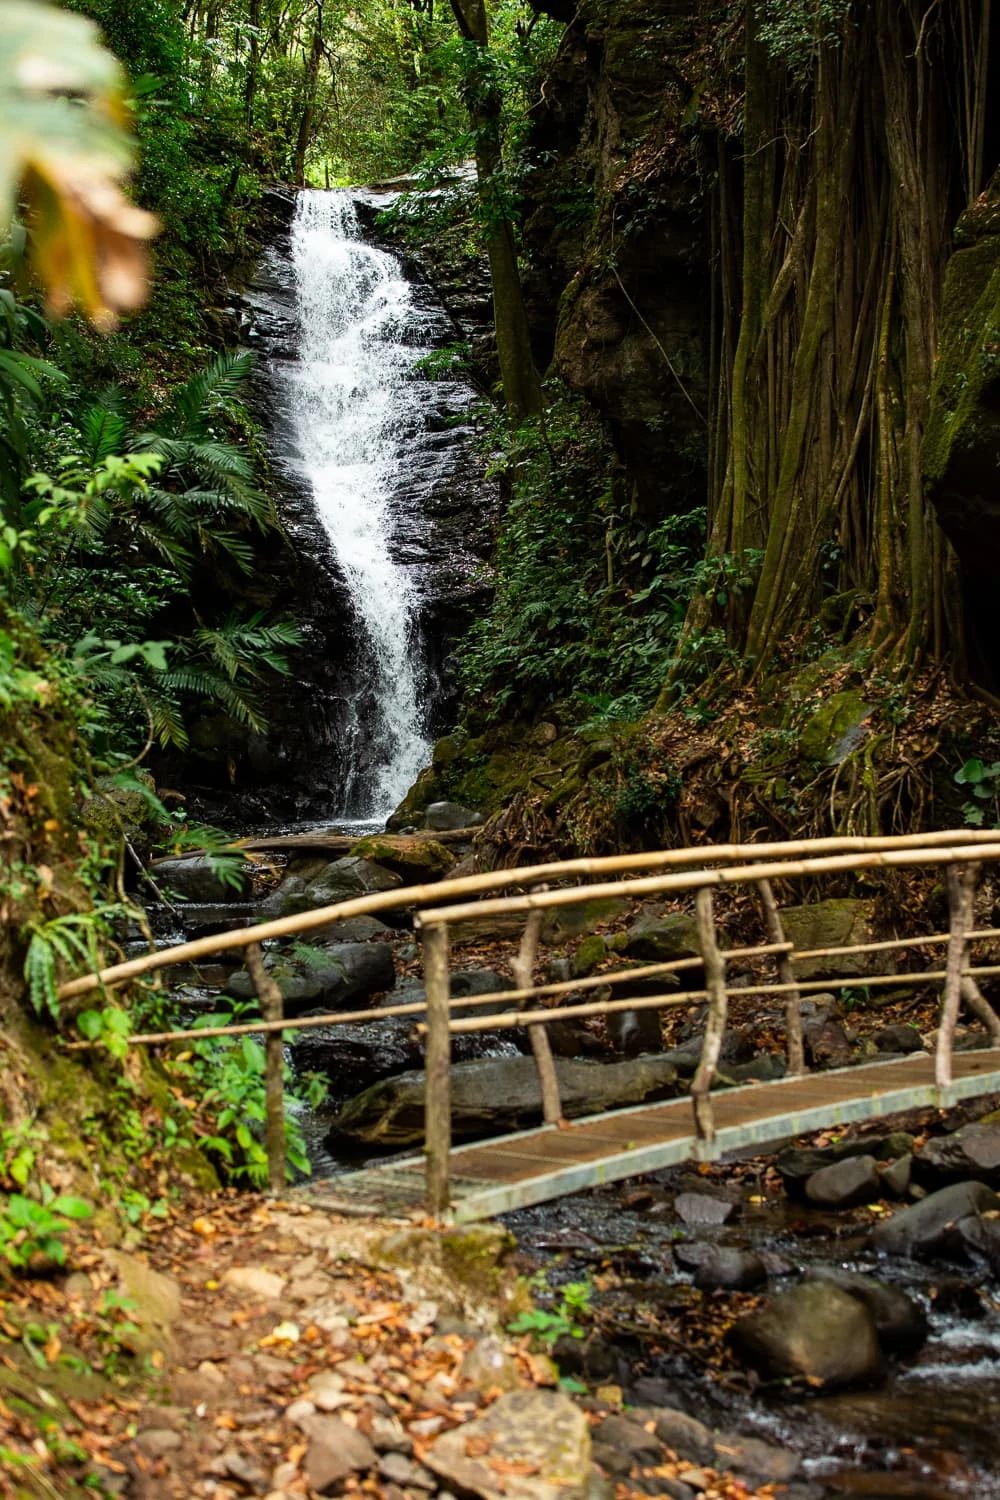 A wooden bridge crosses in front of a white waterfall streaming down black rocks in Monteverde, Costa Rica.